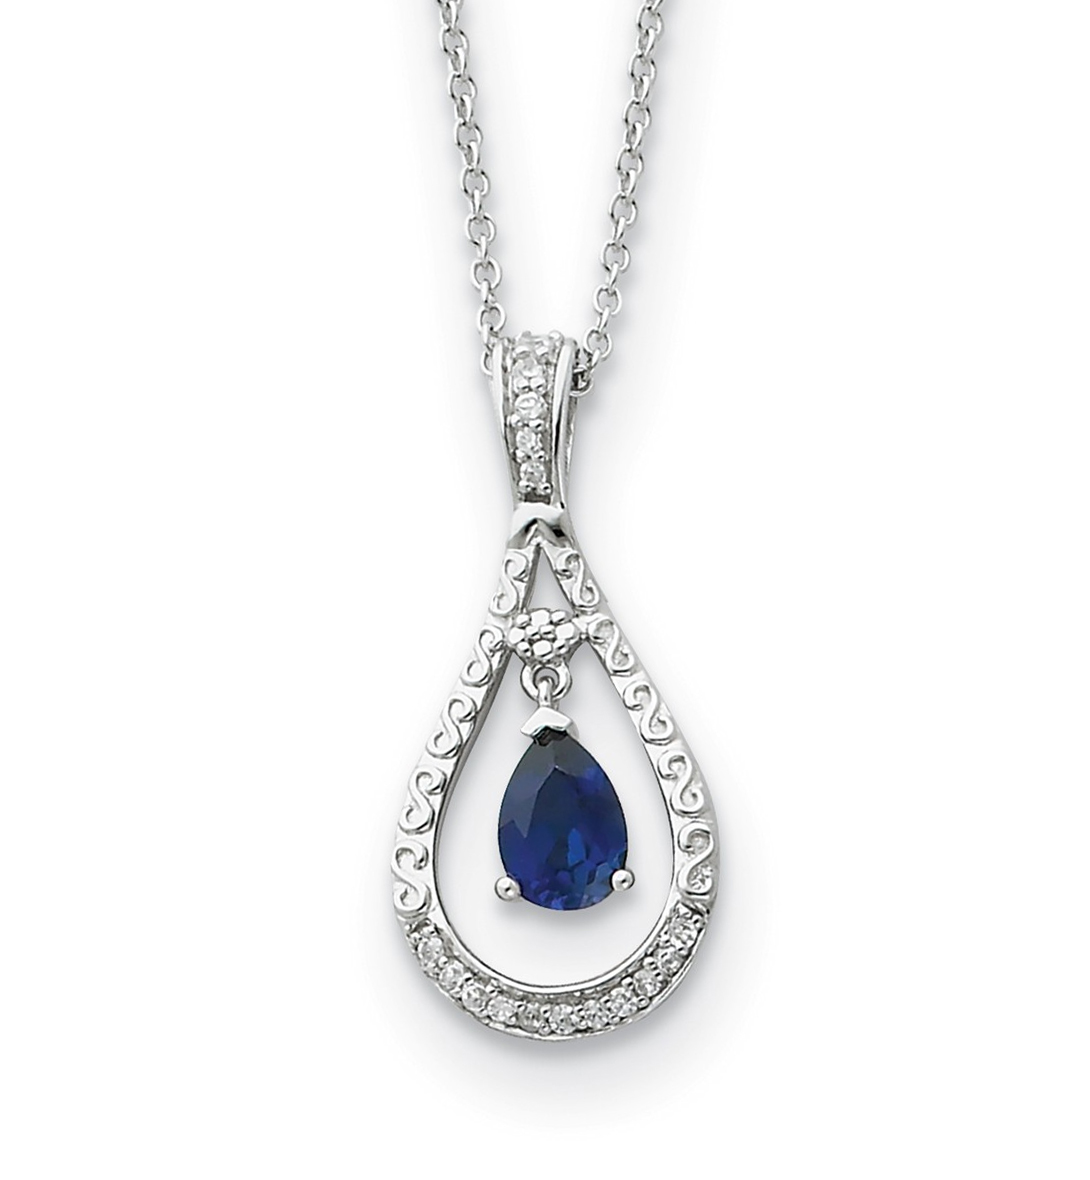 Antiqued September CZ Birthstone 'Never Forget Tear' Pendant Necklace, Rhodium-Plated Sterling Silver.